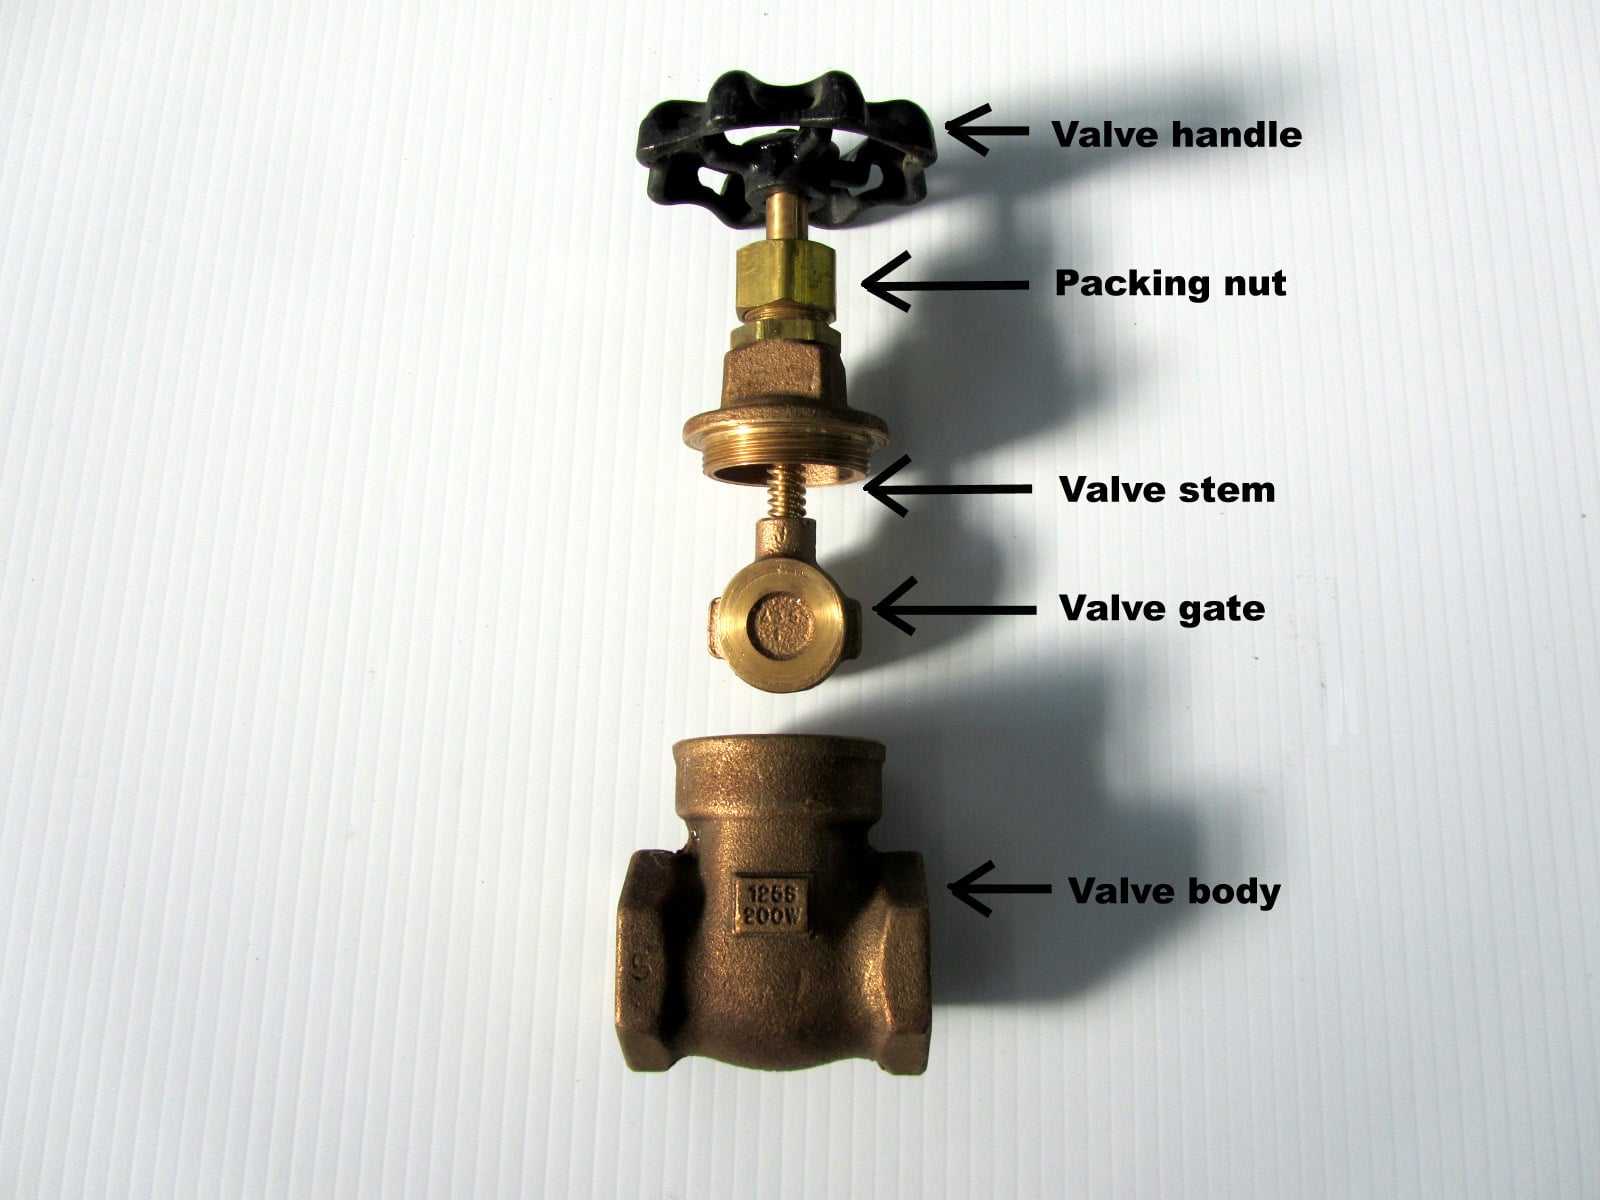 How To Open Or Close A Gate Valve On A Water Line diagram of heater from water pipes under house 